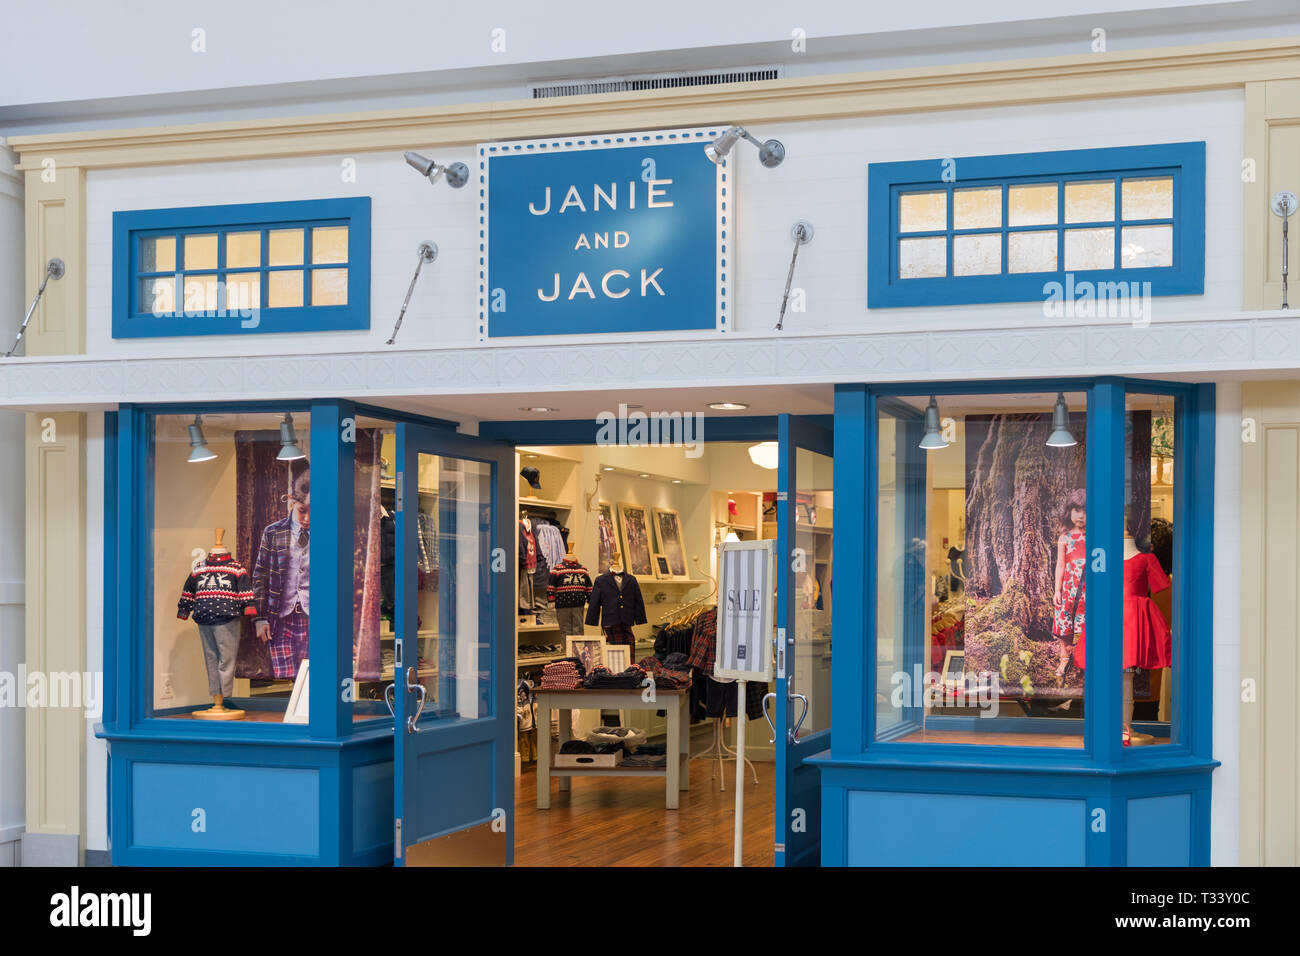 New Jersey, NJ, October 6 2018:Janie and Jack store front, Children's Clothing and Newborn Clothing at Janie and Jack Stock Photo